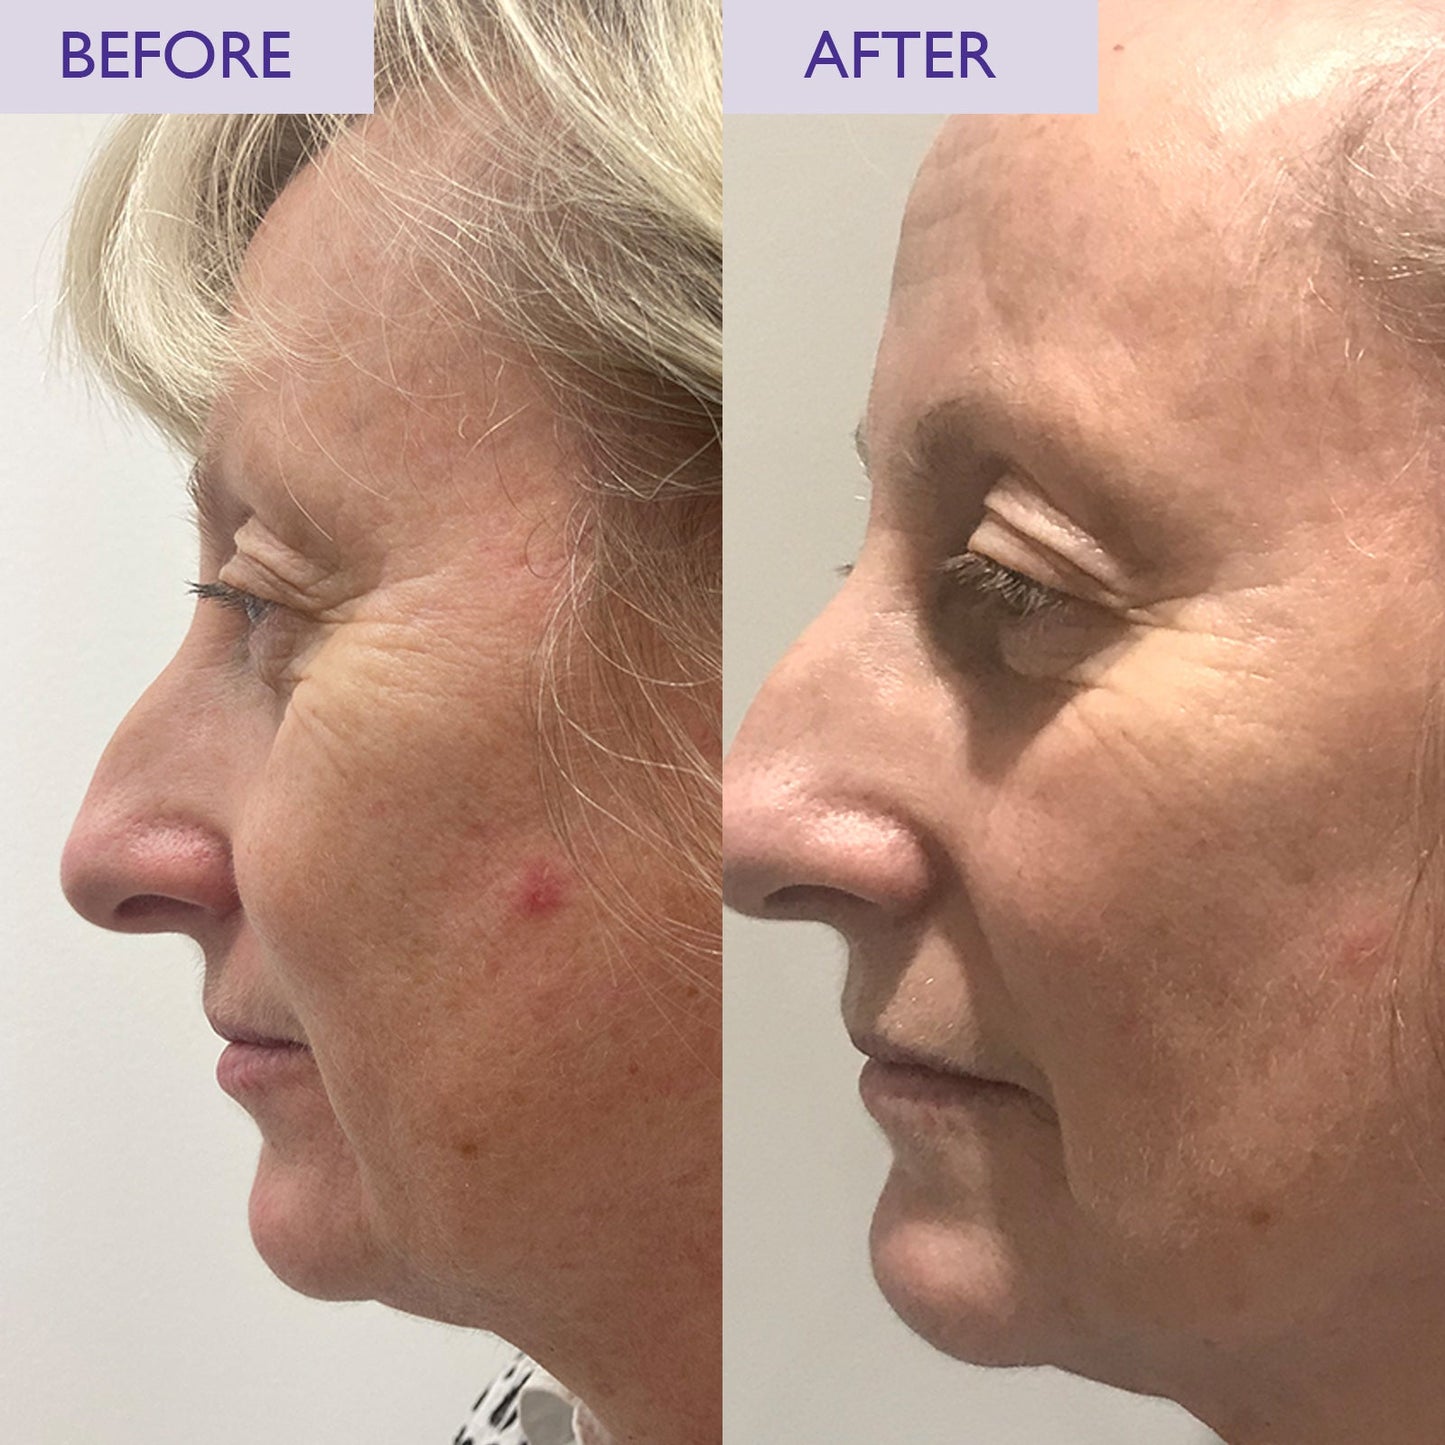 Before and after image of a lady having used retinol night cream over 4 weeks.  Improvement in wrinkles and breakouts can be seen